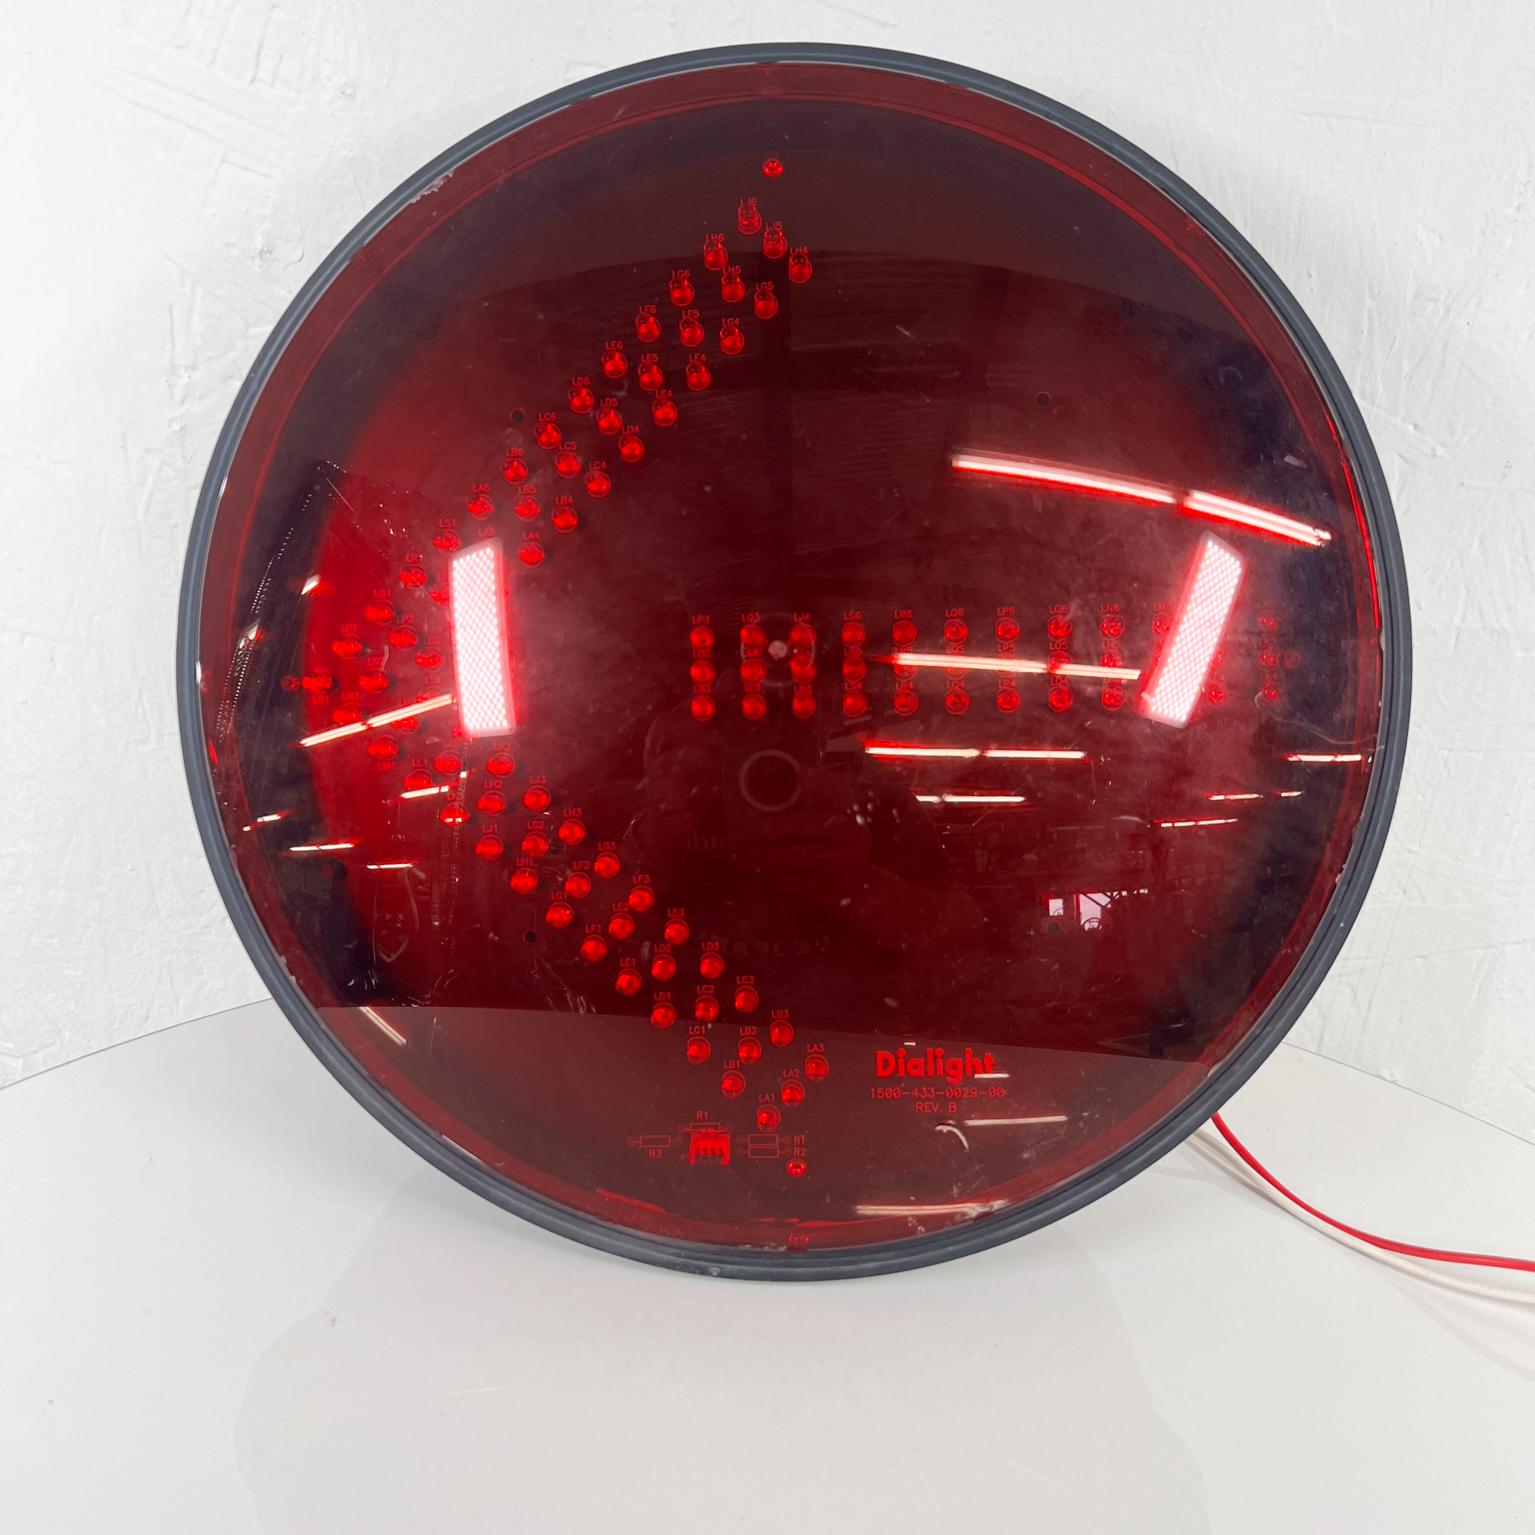 Vintage LED Red Arrow Traffic Signal Light by Dialight Mexico
12 inch
12.25 diameter x 5.25 d
Preowned vintage original unrestored condition.
Refer to all images.